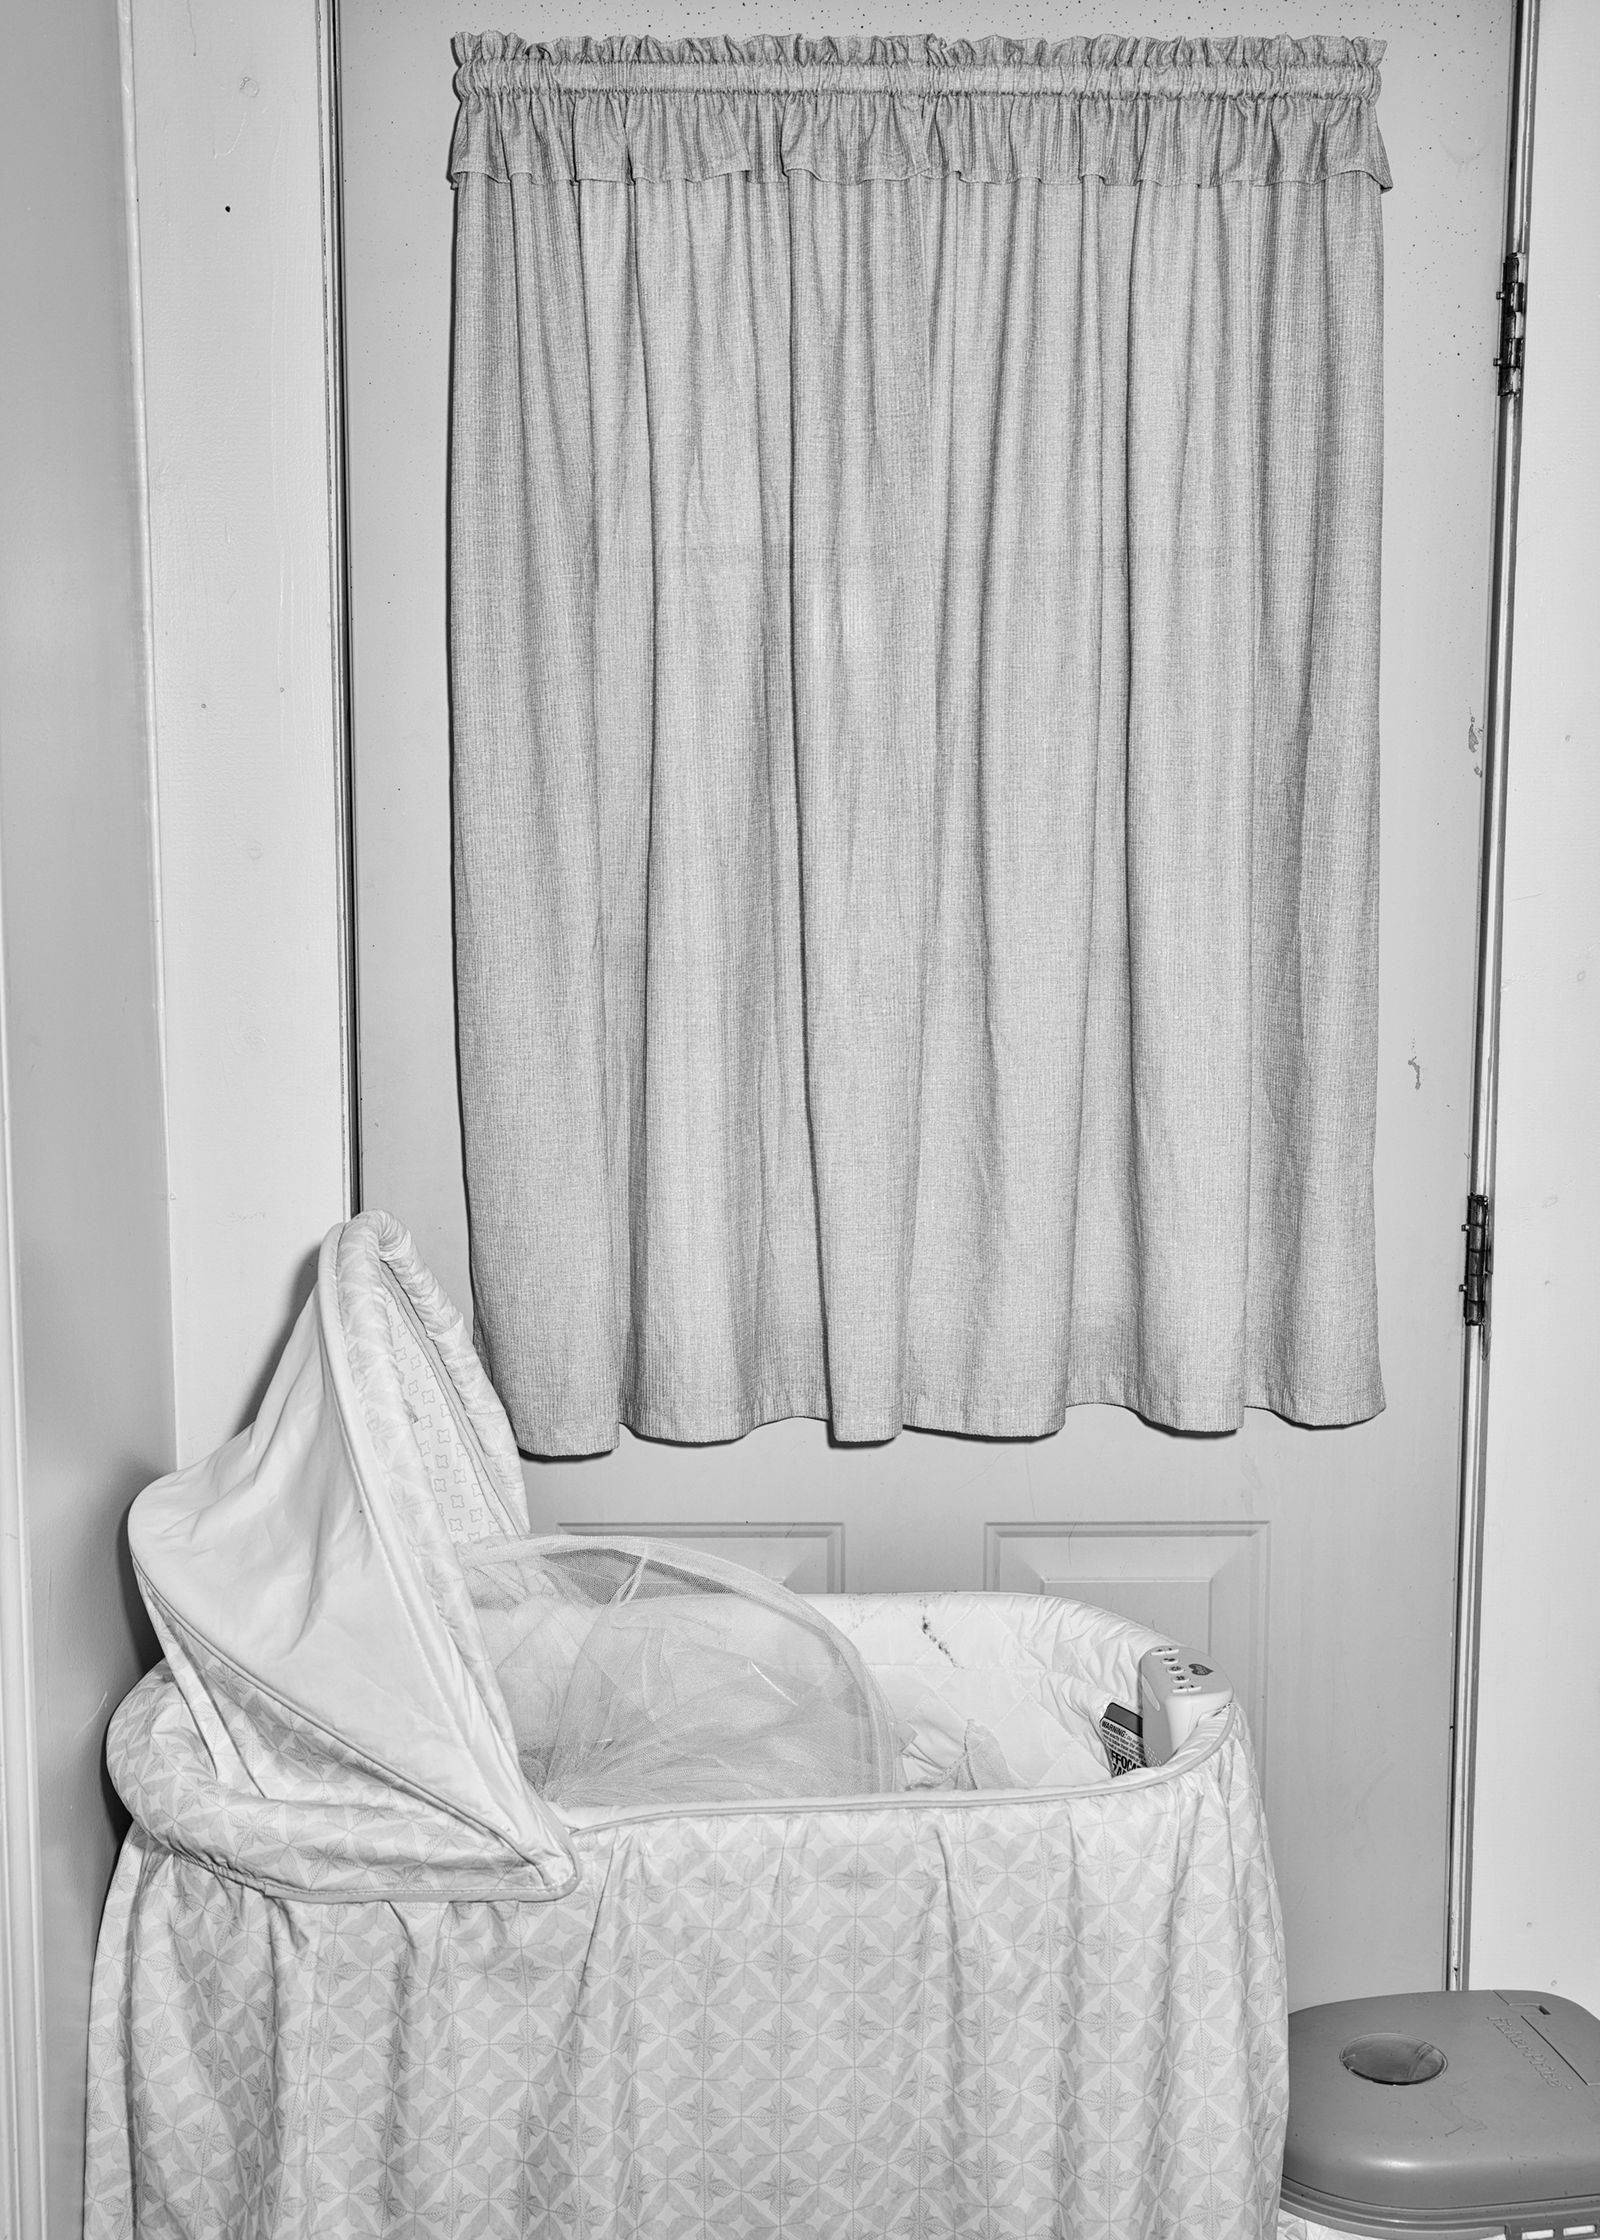 © Maggie Shannon - The cradle and other baby items were set up at Barbie’s home in Fremont, Michigan for the arrival of her new baby.